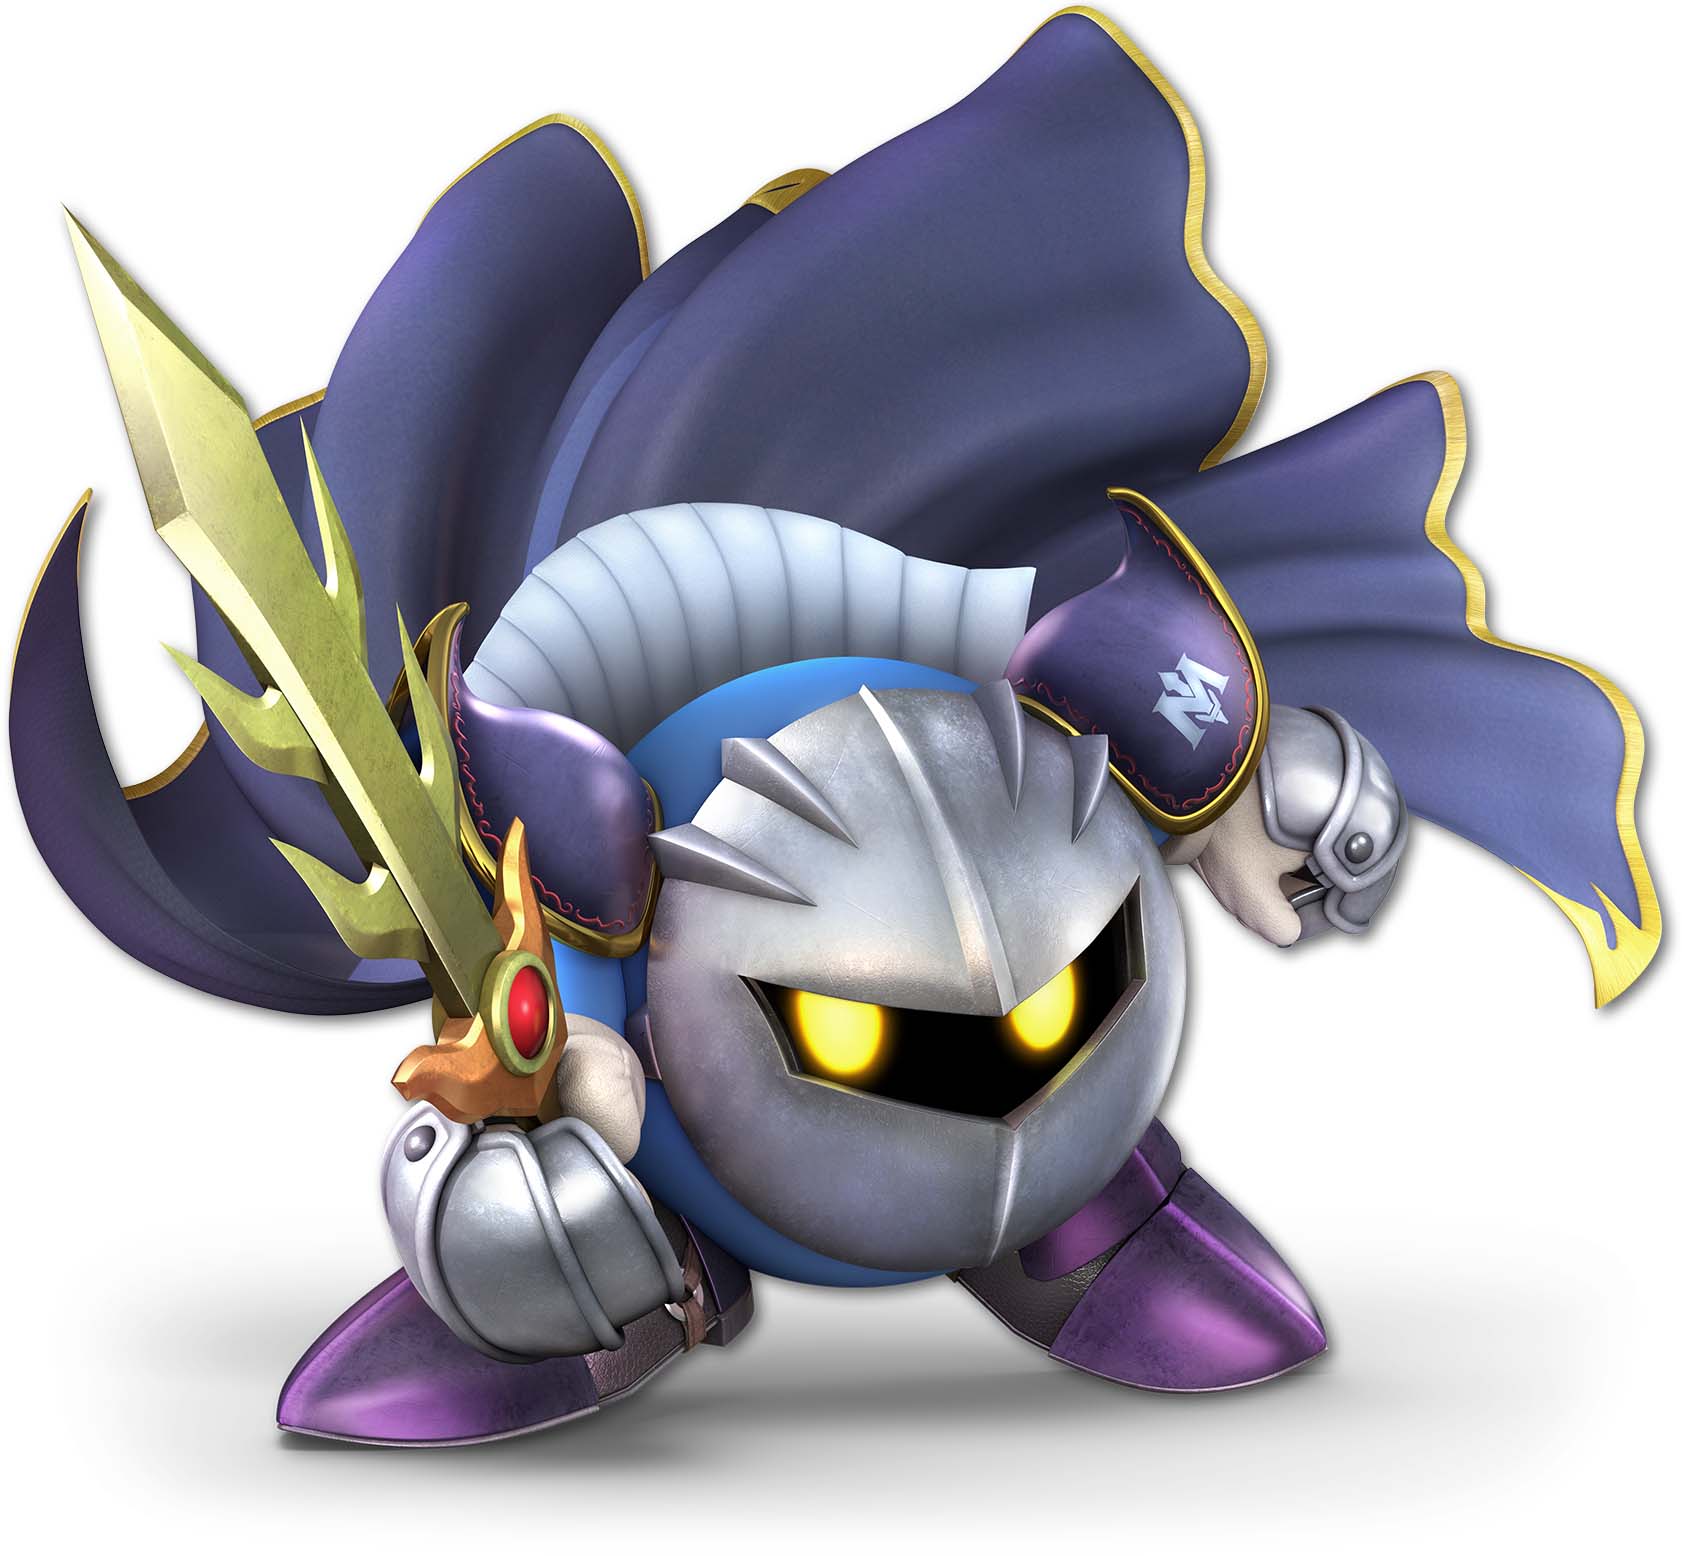 How to counter Meta Knight with Greninja in Super Smash Bros. Ultimate